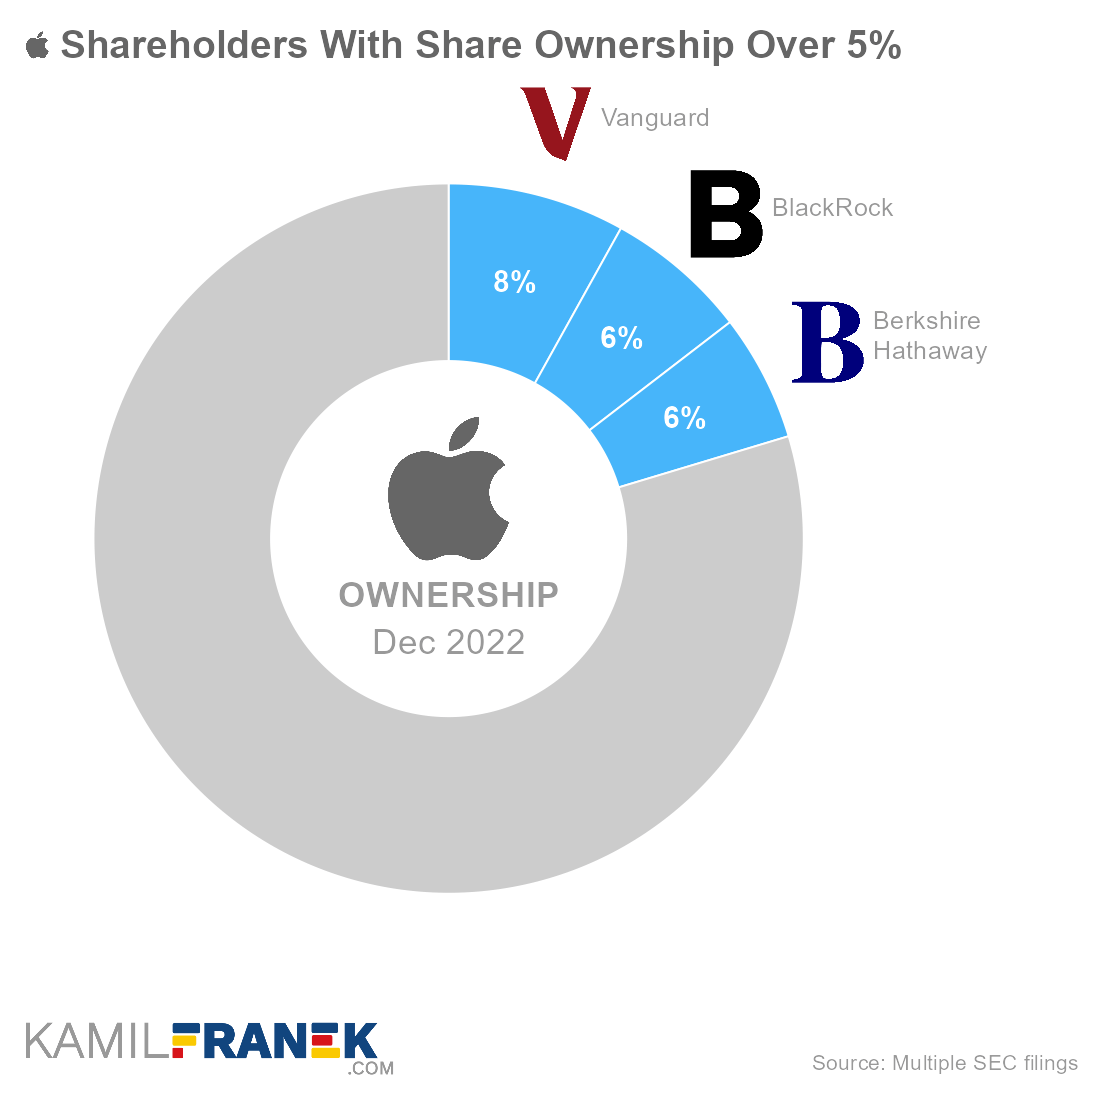 Apple largest shareholders by share ownership and vote control (donut chart)